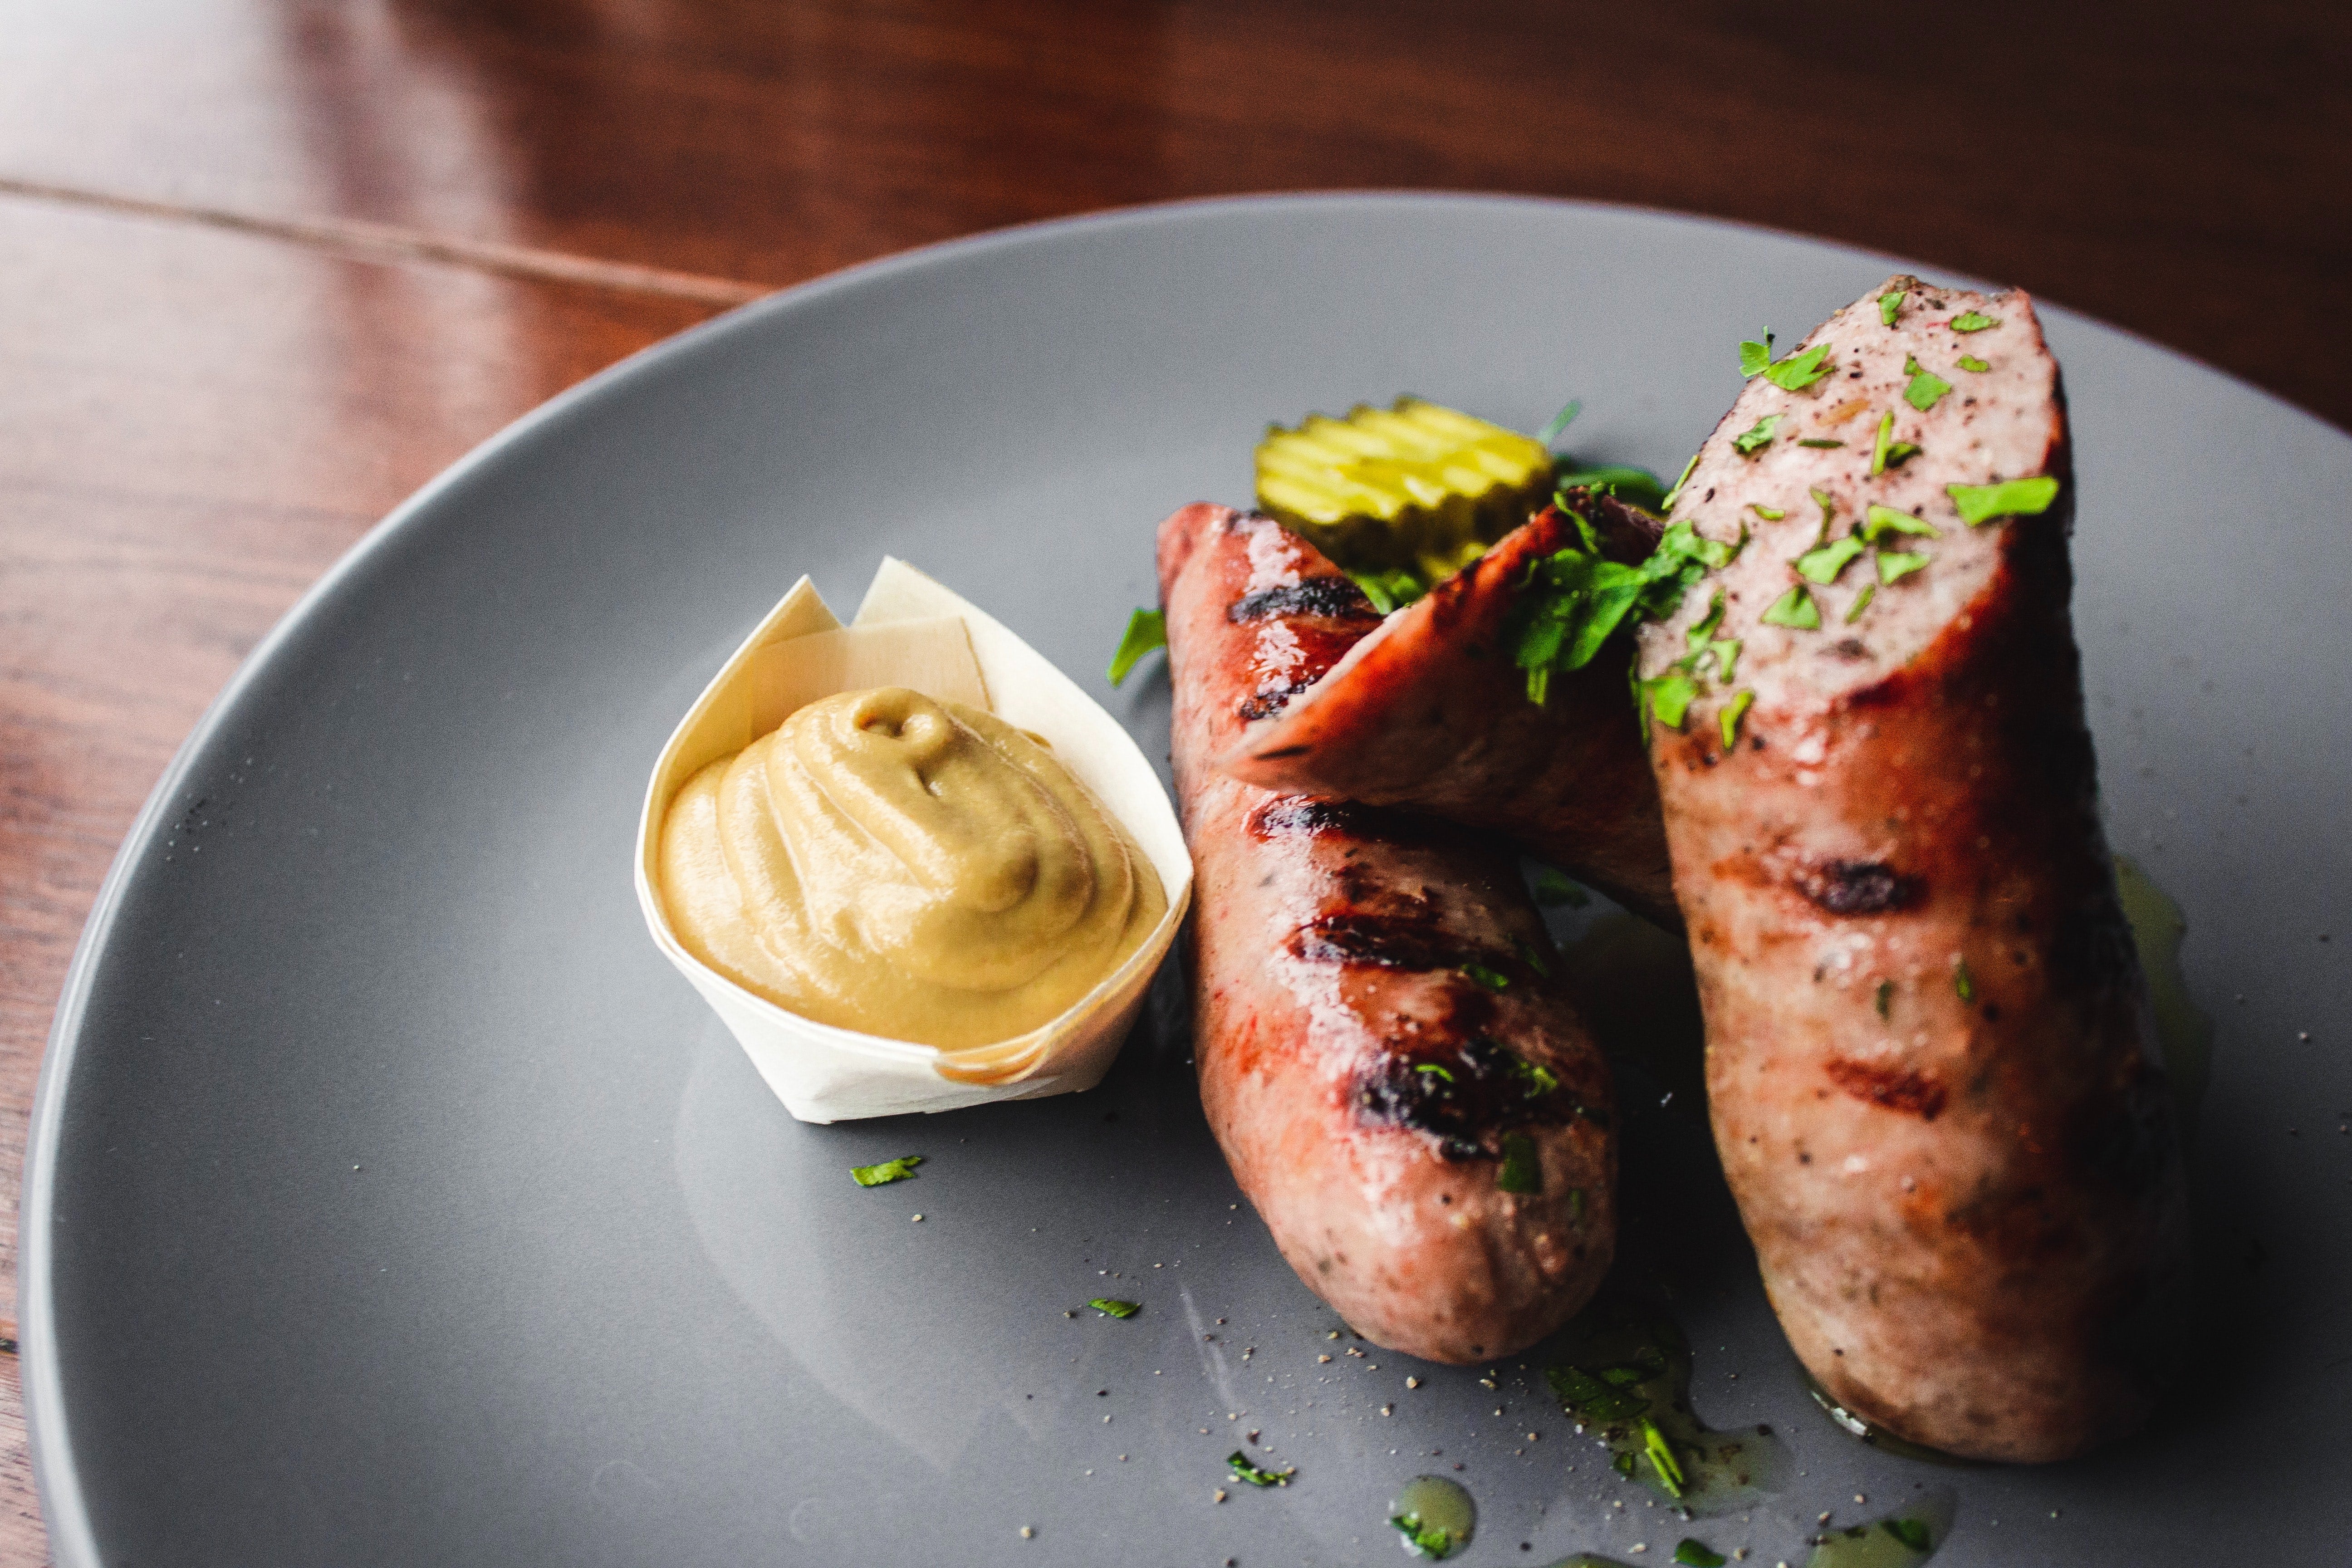 Pork sausage on blue plate with side of mustard 